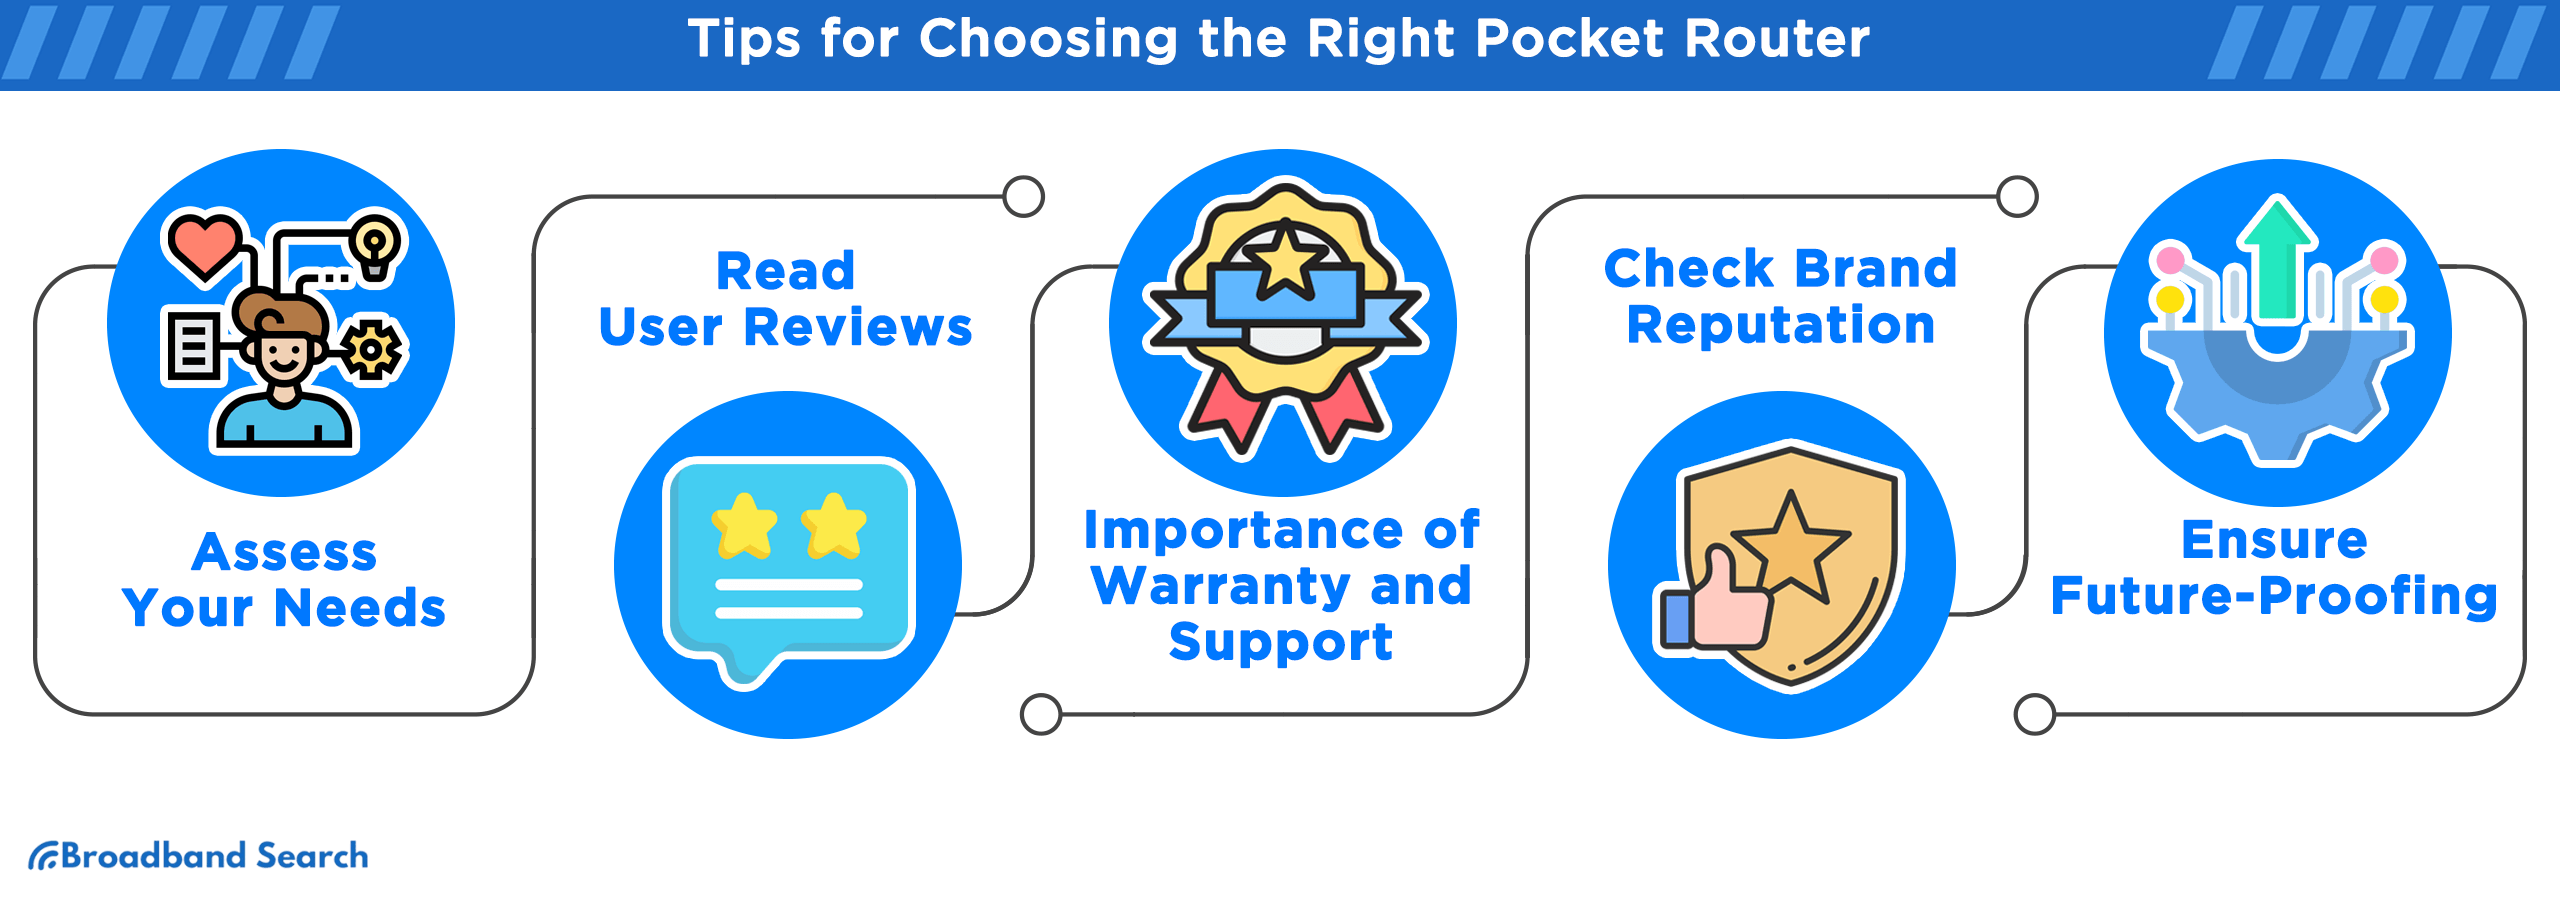 Five tips for choosing the right pocket router